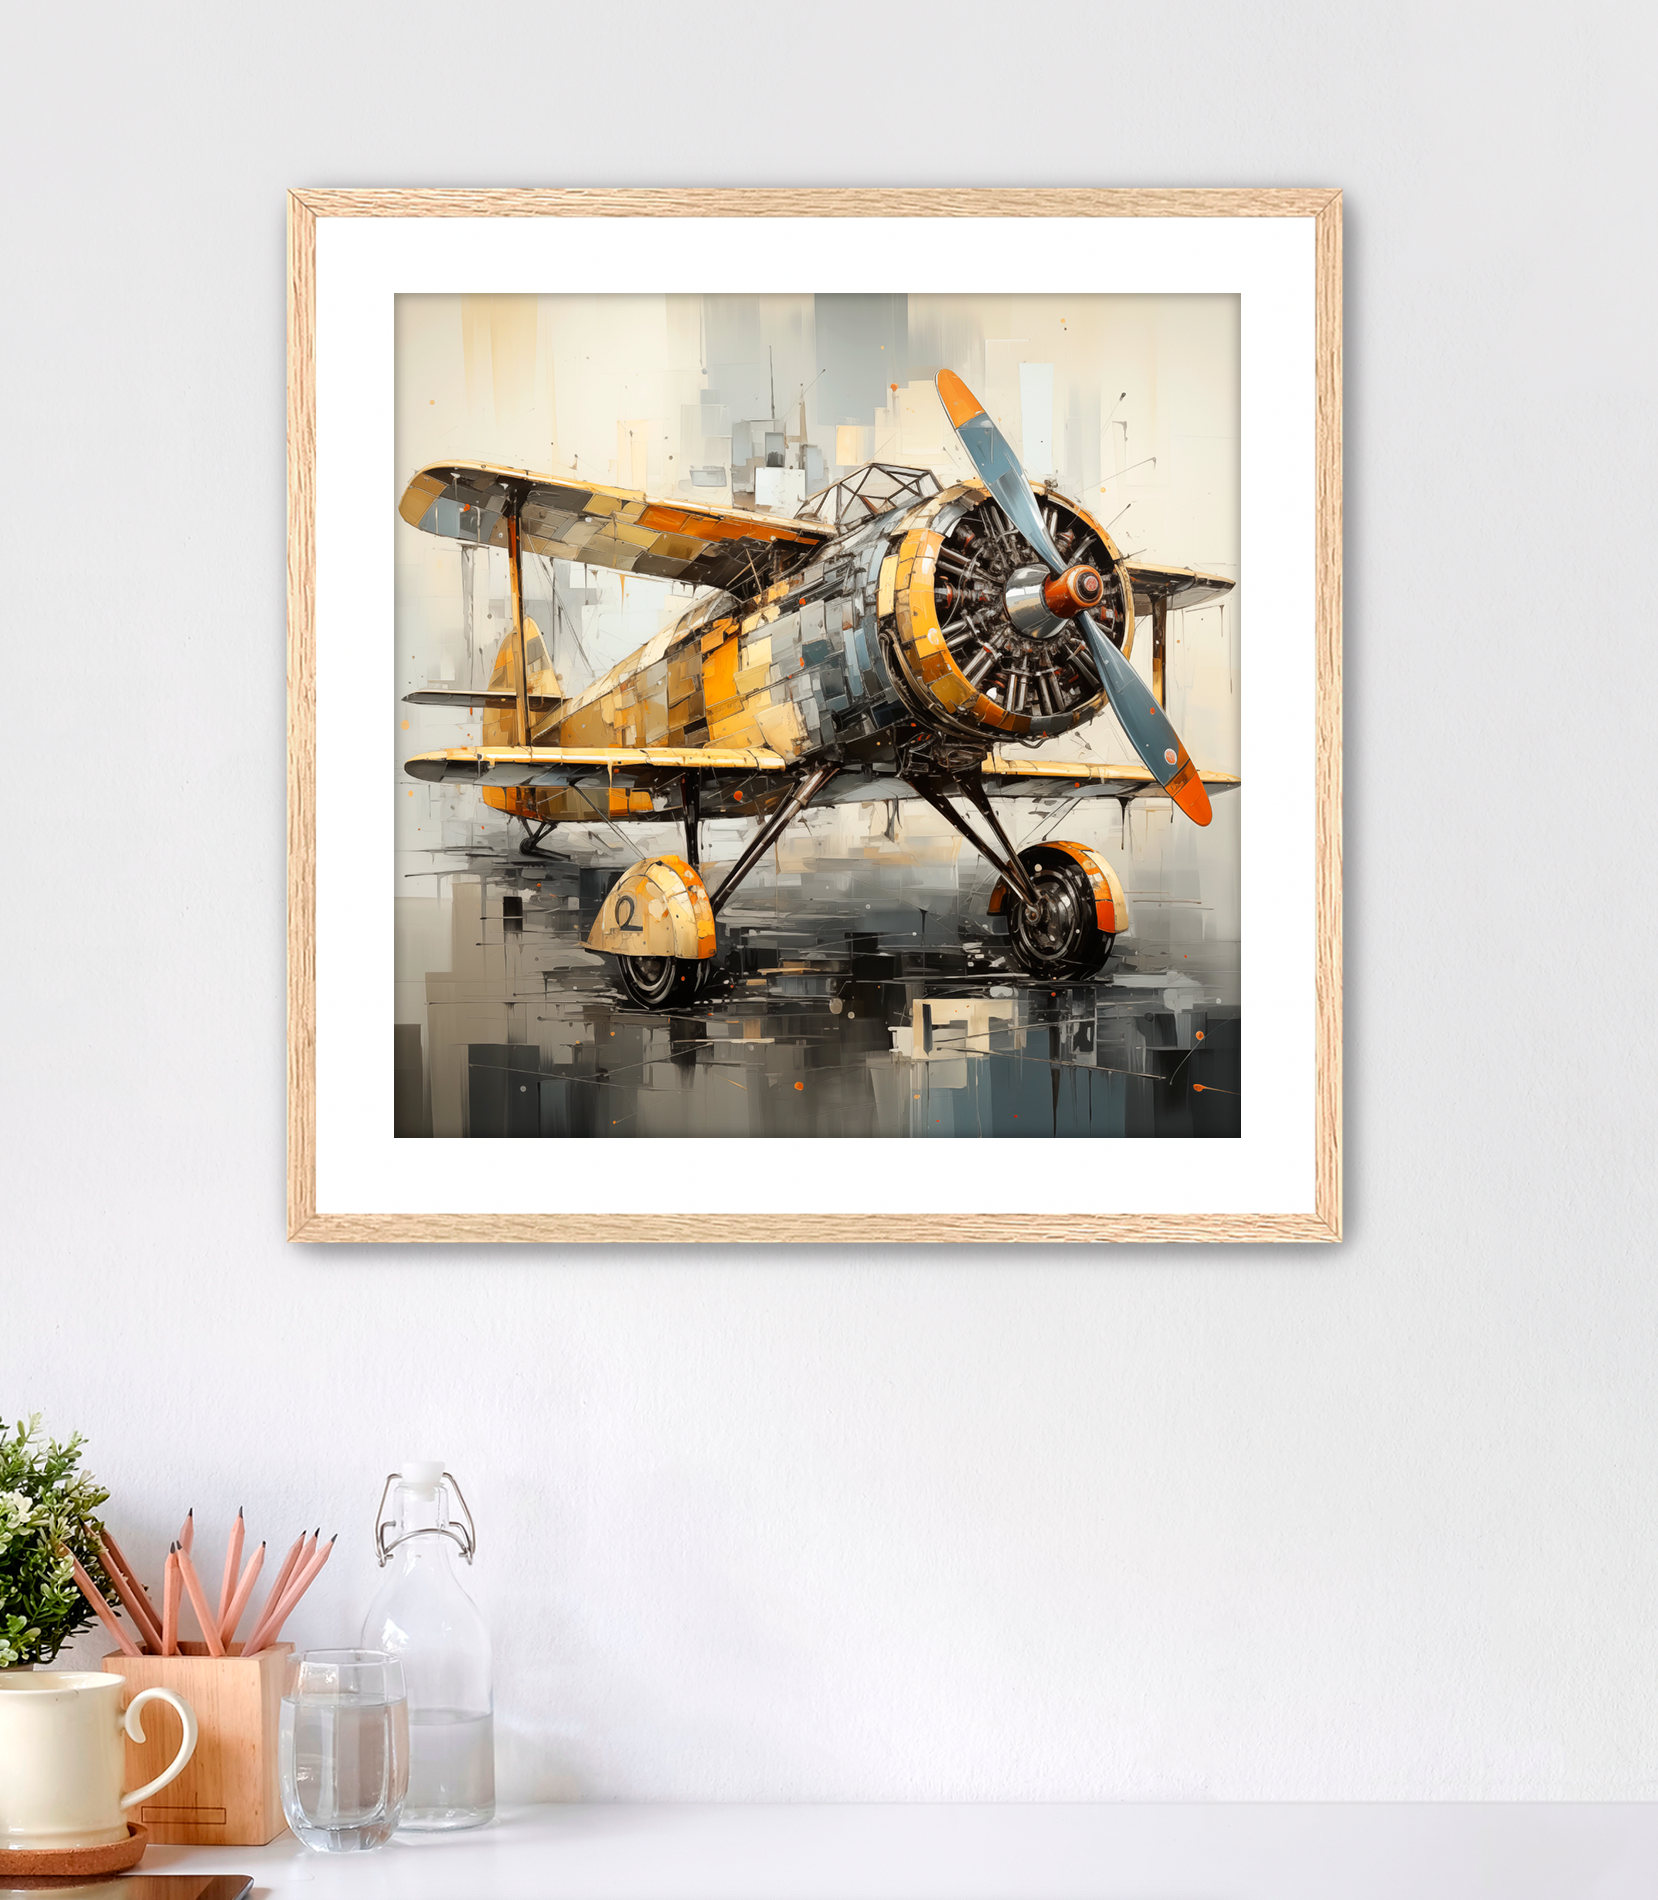 Vintage Abstract Biplane, Vintage aircraft with cubist detail. Subtle neutral color palette with yellow and orange accents. Art includes a white mat and oak frame.A perfect piece of artwork for pilots or avaiation enthusiasts. This wall art is for sale at customconcepts.art